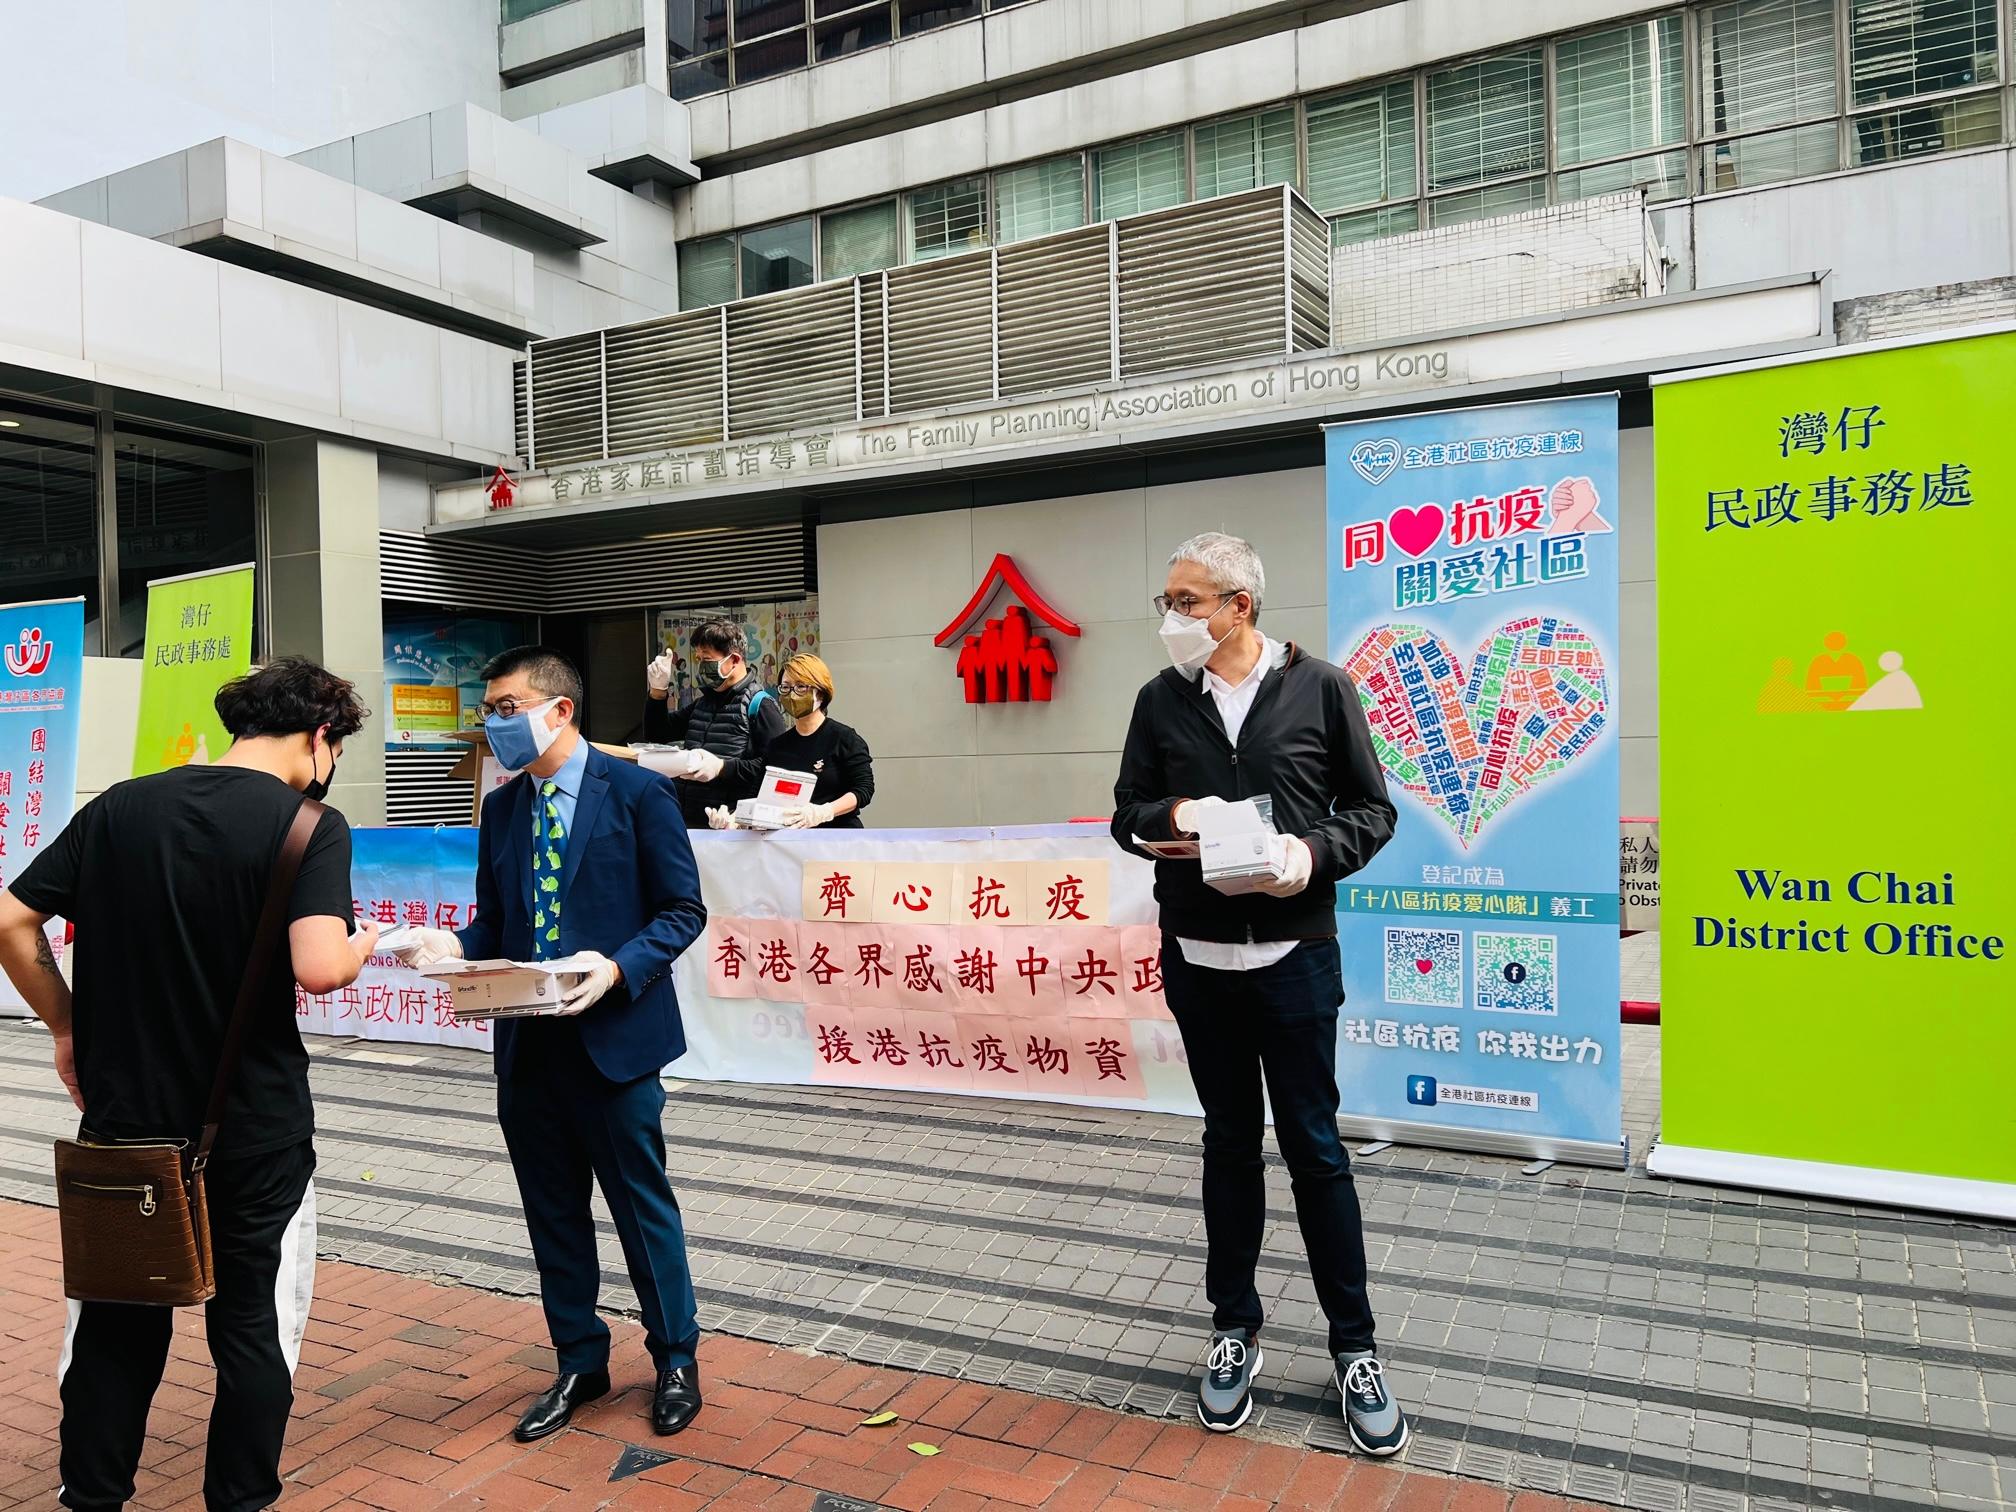 The Wan Chai District Office, together with the Hong Kong Community Anti- Coronavirus Link, distributed COVID-19 rapid test kits in Wan Chai District to residents today (February 28).
